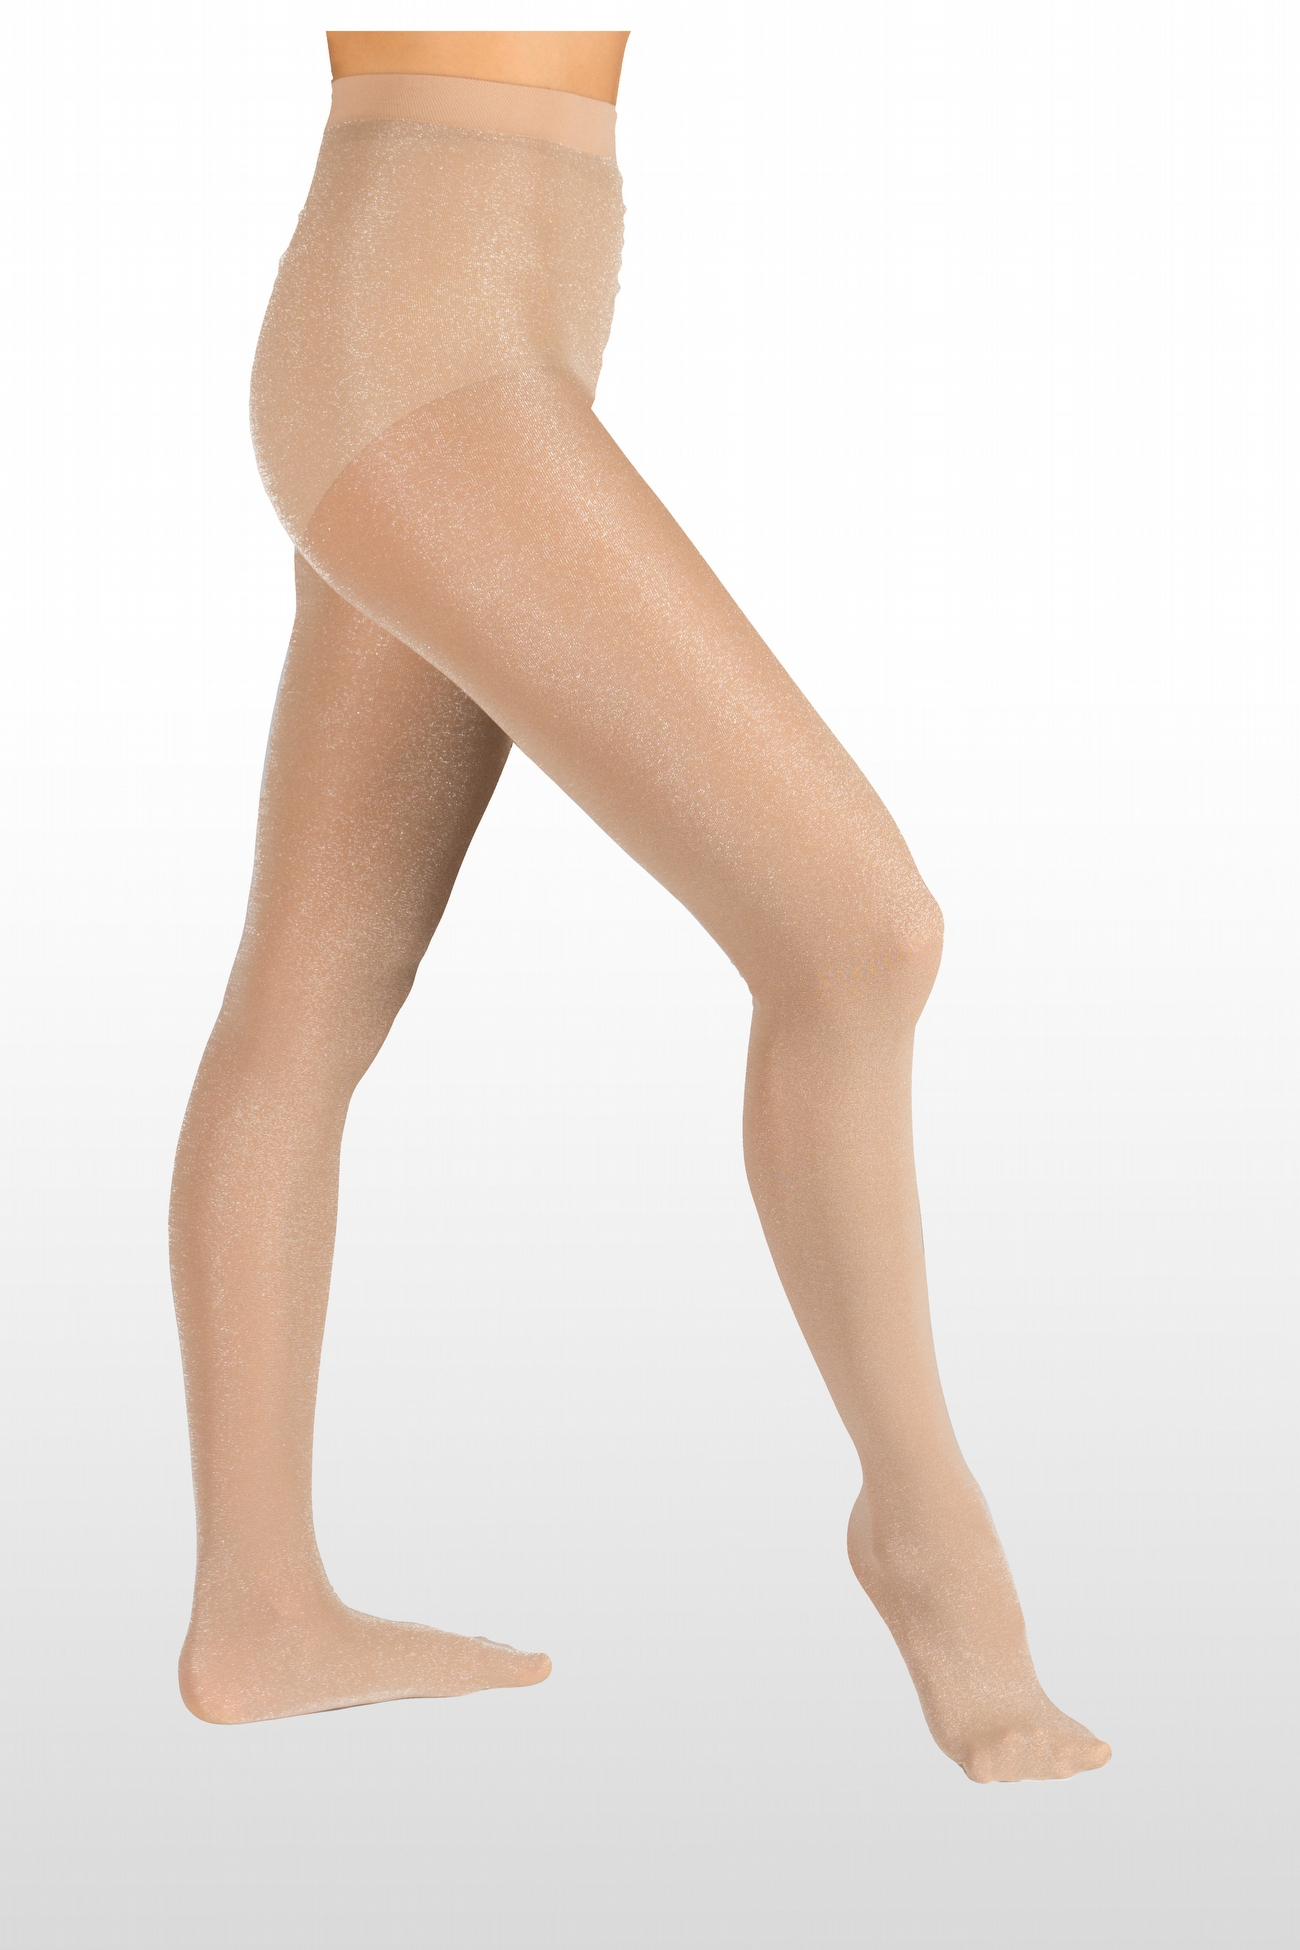 compra online Skating FOOTED TIGHTS WITH LUREX 40 DEN